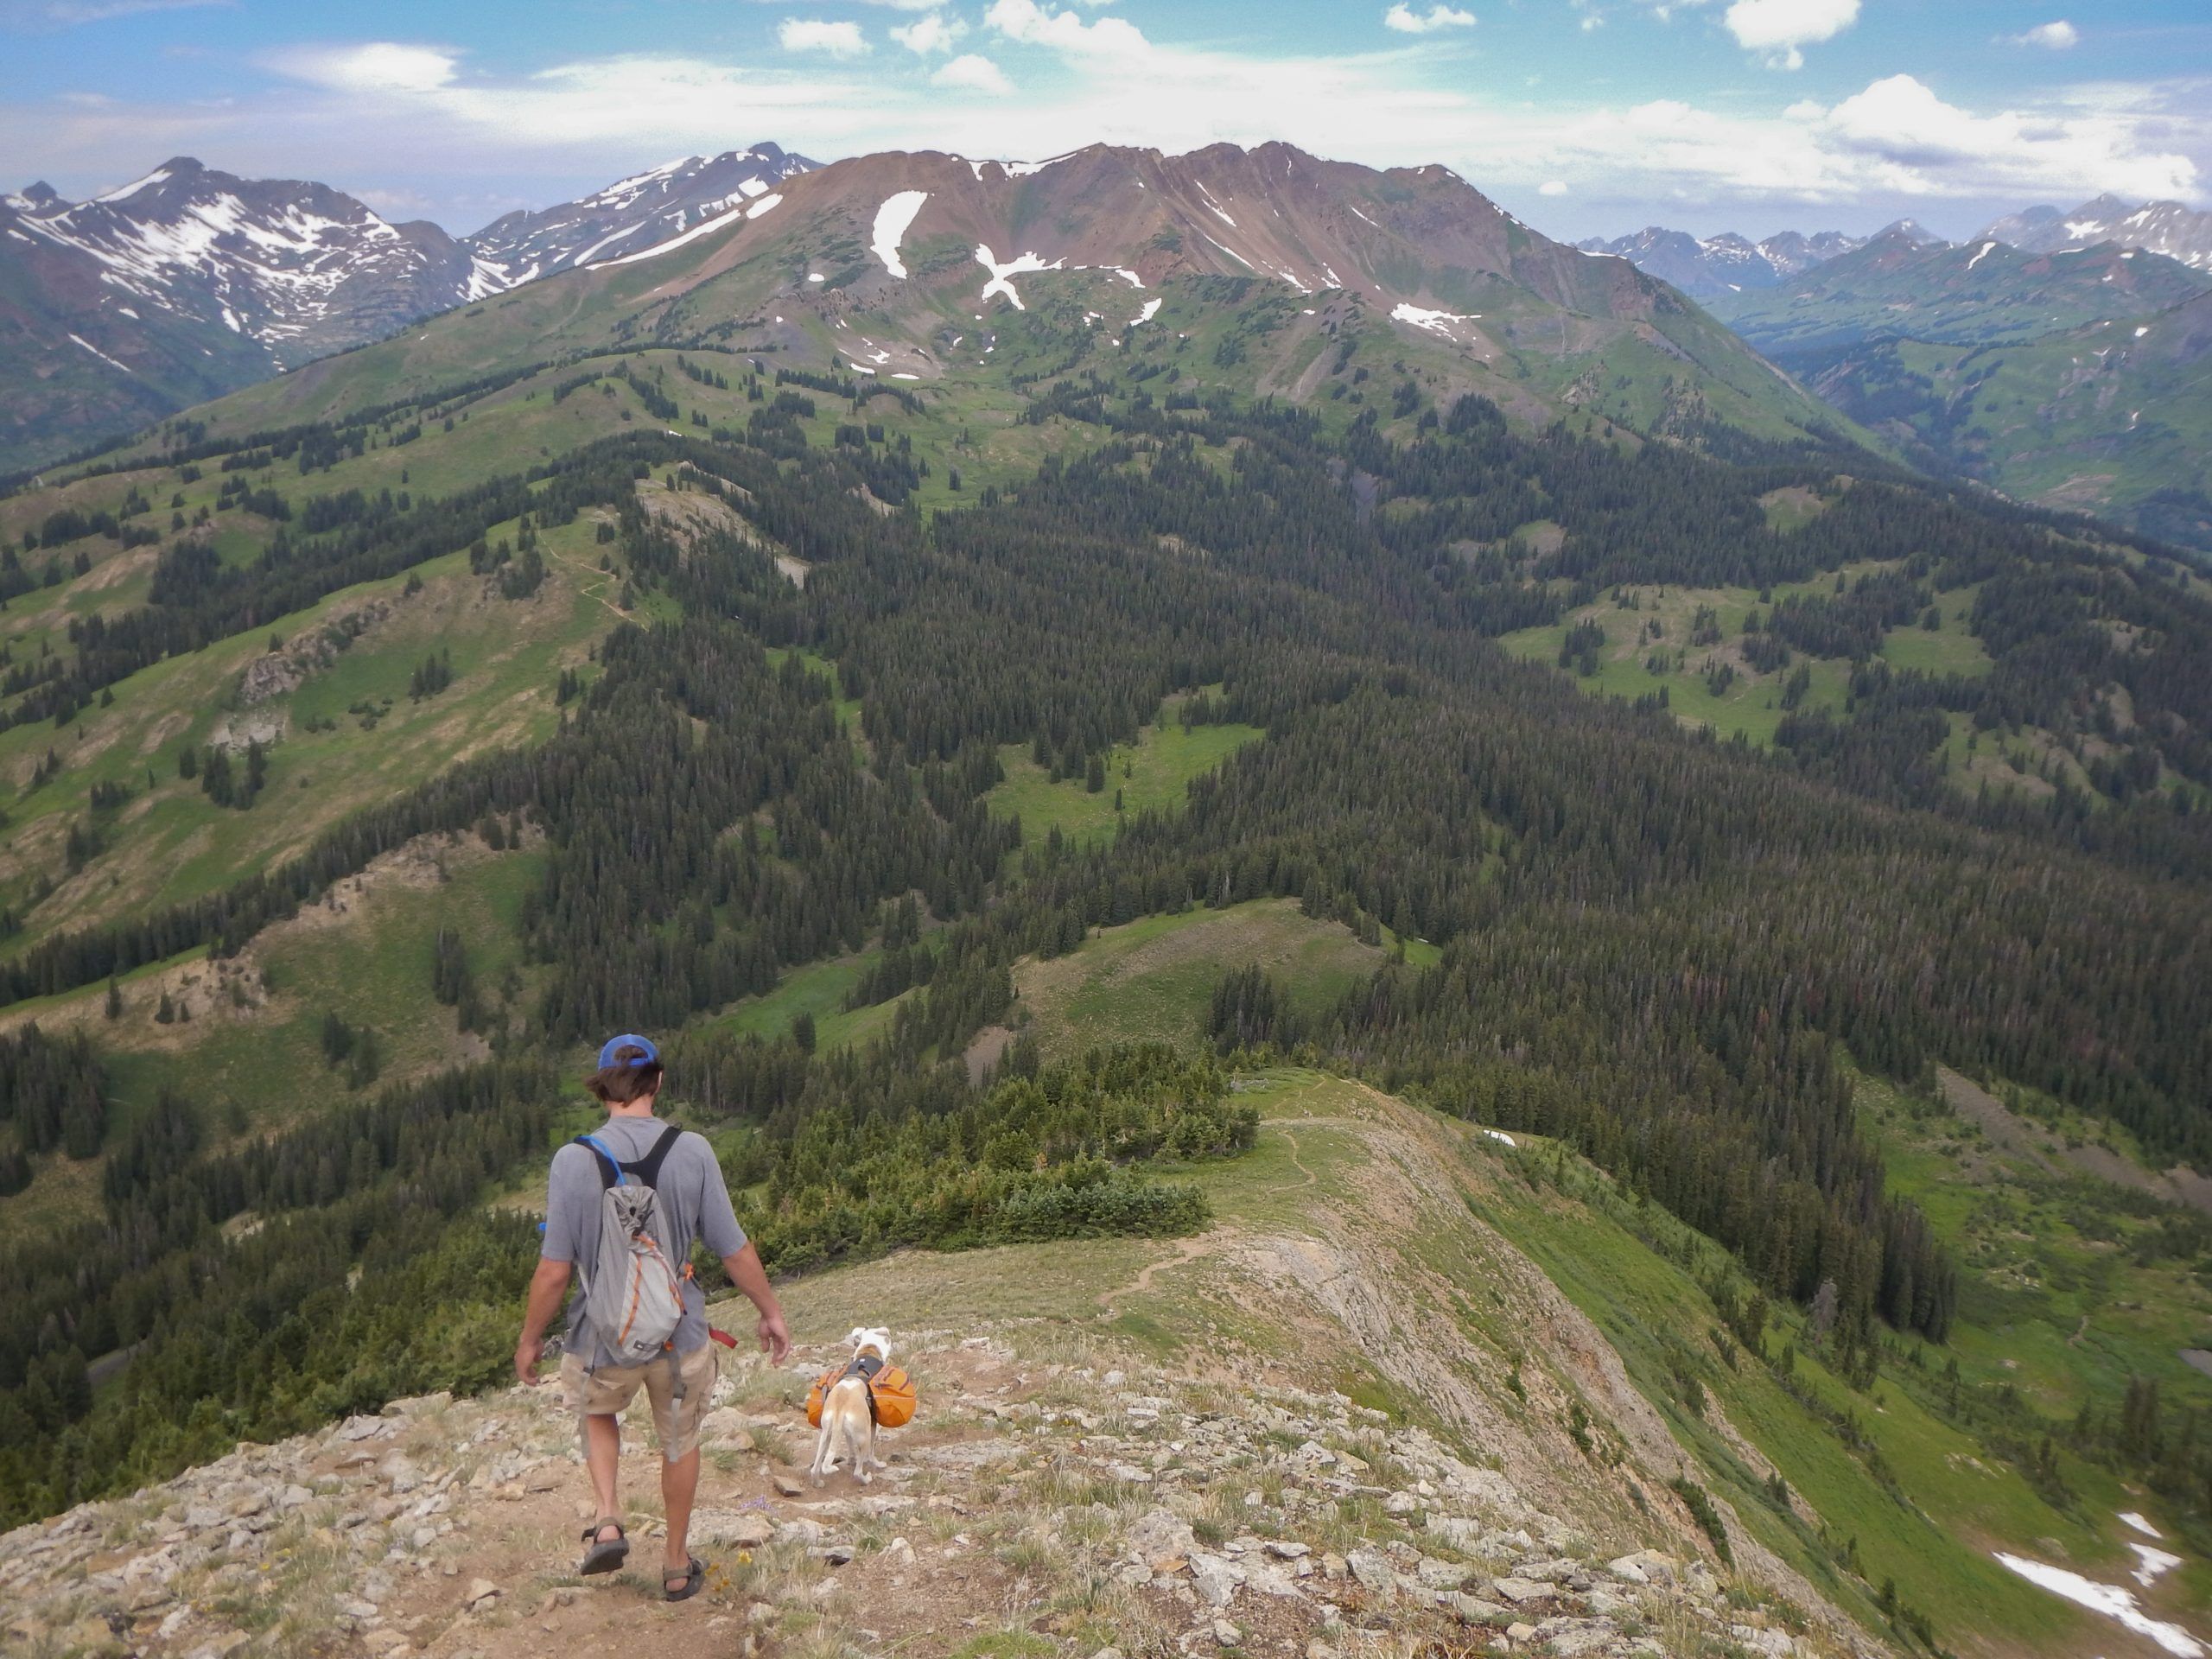 A dog and their owner hike Gothic Mountain near Crested Butte, Colorado. The view features surrounding peaks and valleys.